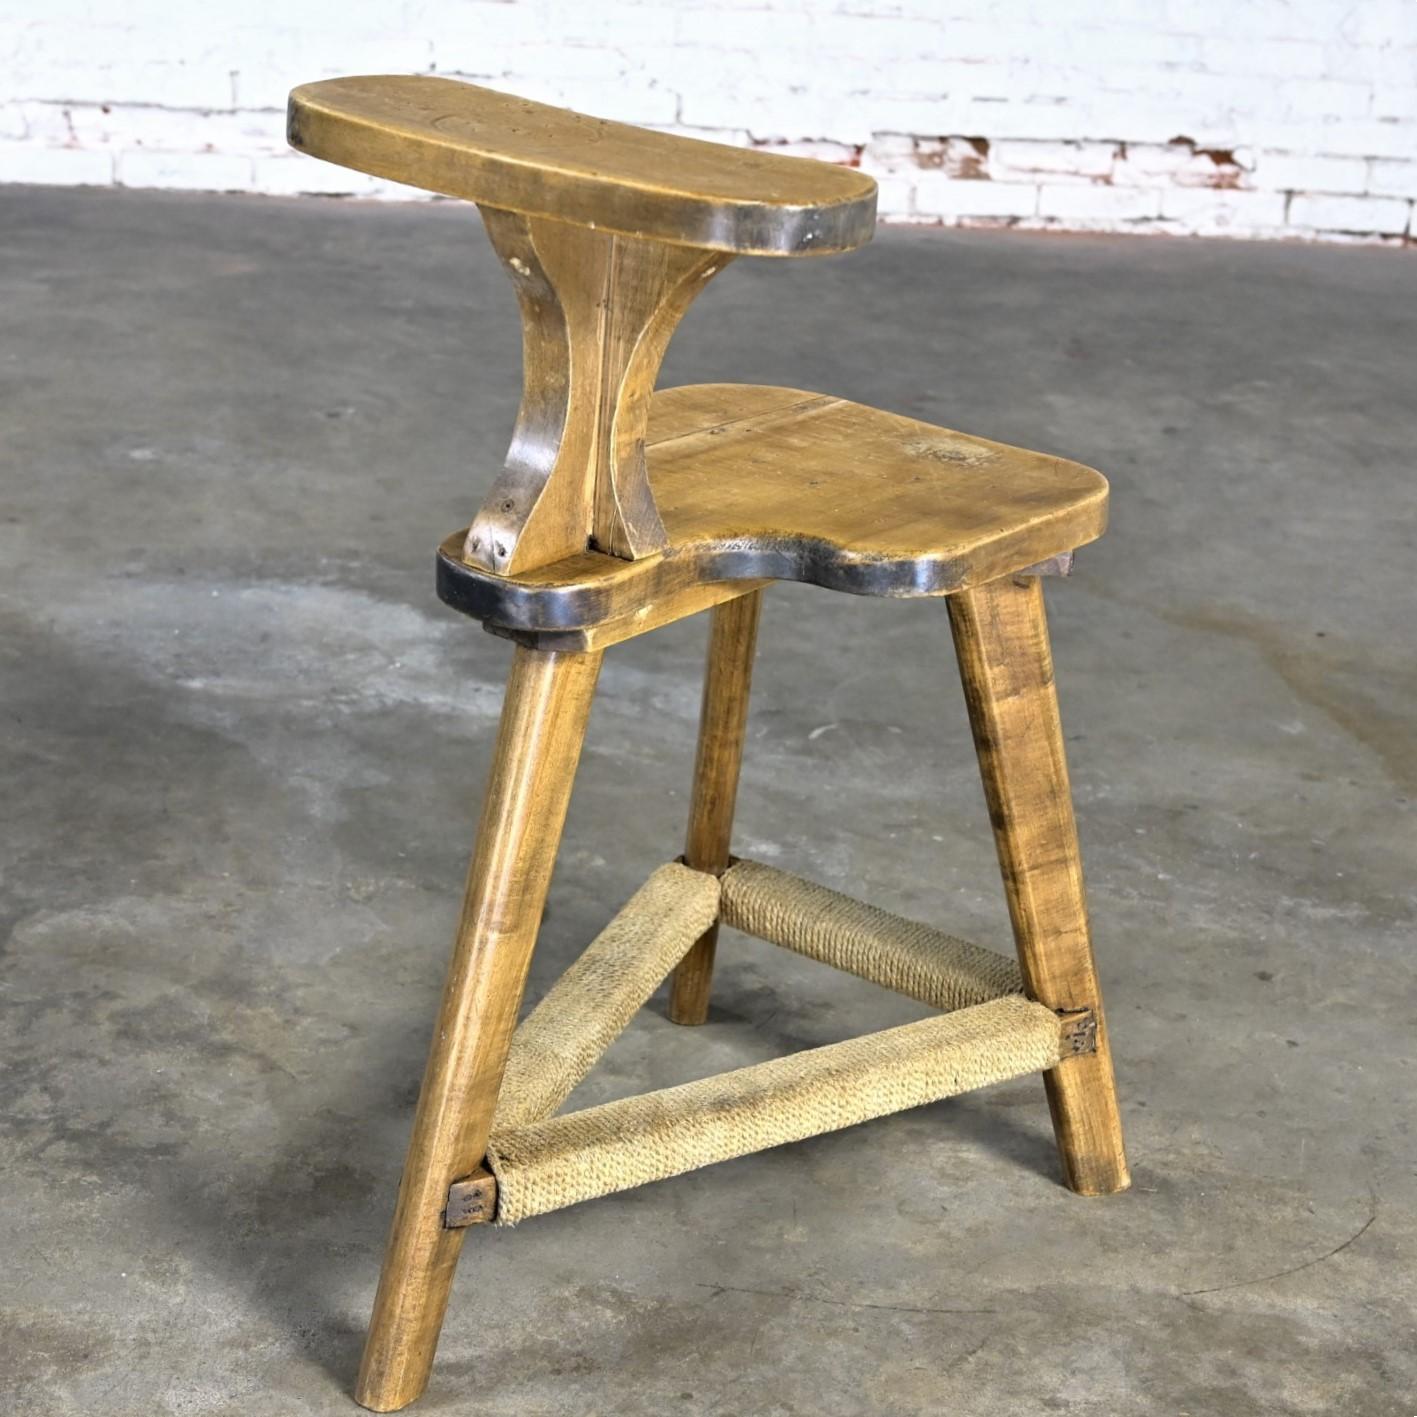 Awesome vintage Rustic distressed maple cockfighting, betting, or sporting chair with tri-leg base & twisted rope wrapped details. Beautiful condition, keeping in mind that this is vintage and not new so will have signs of use and wear even if it